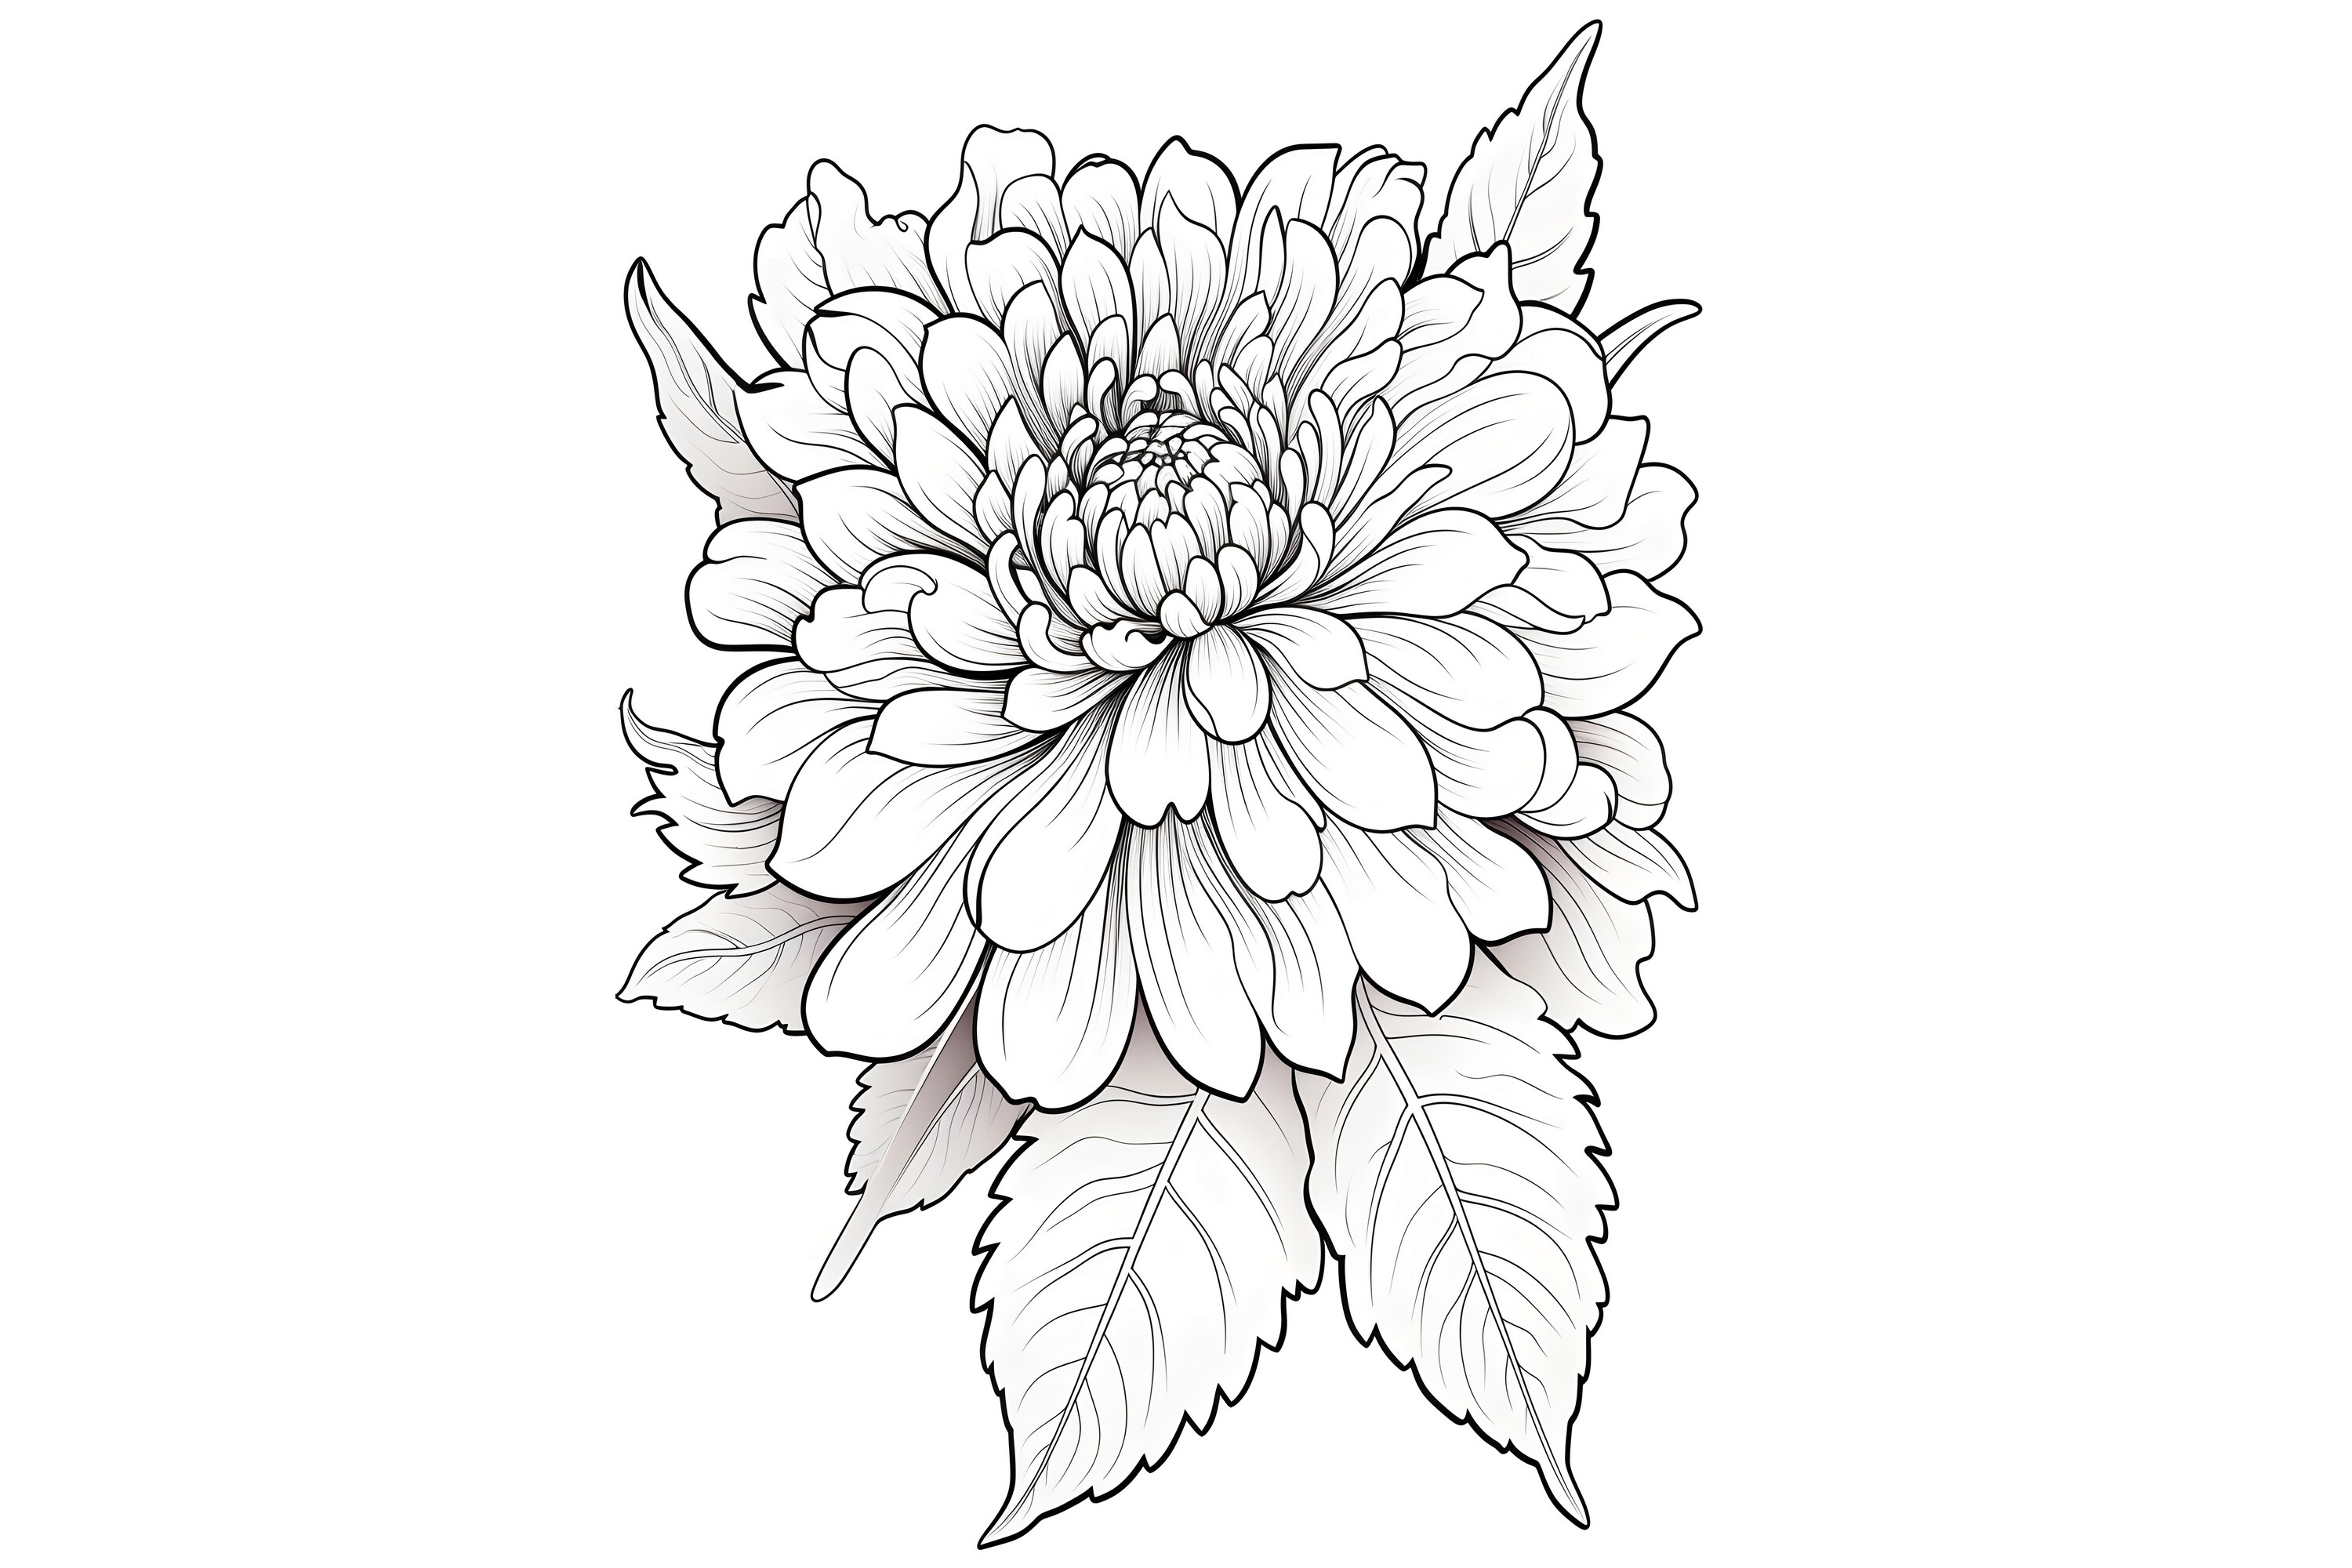 Flower Coloring Page Graphic by mimishop · Creative Fabrica